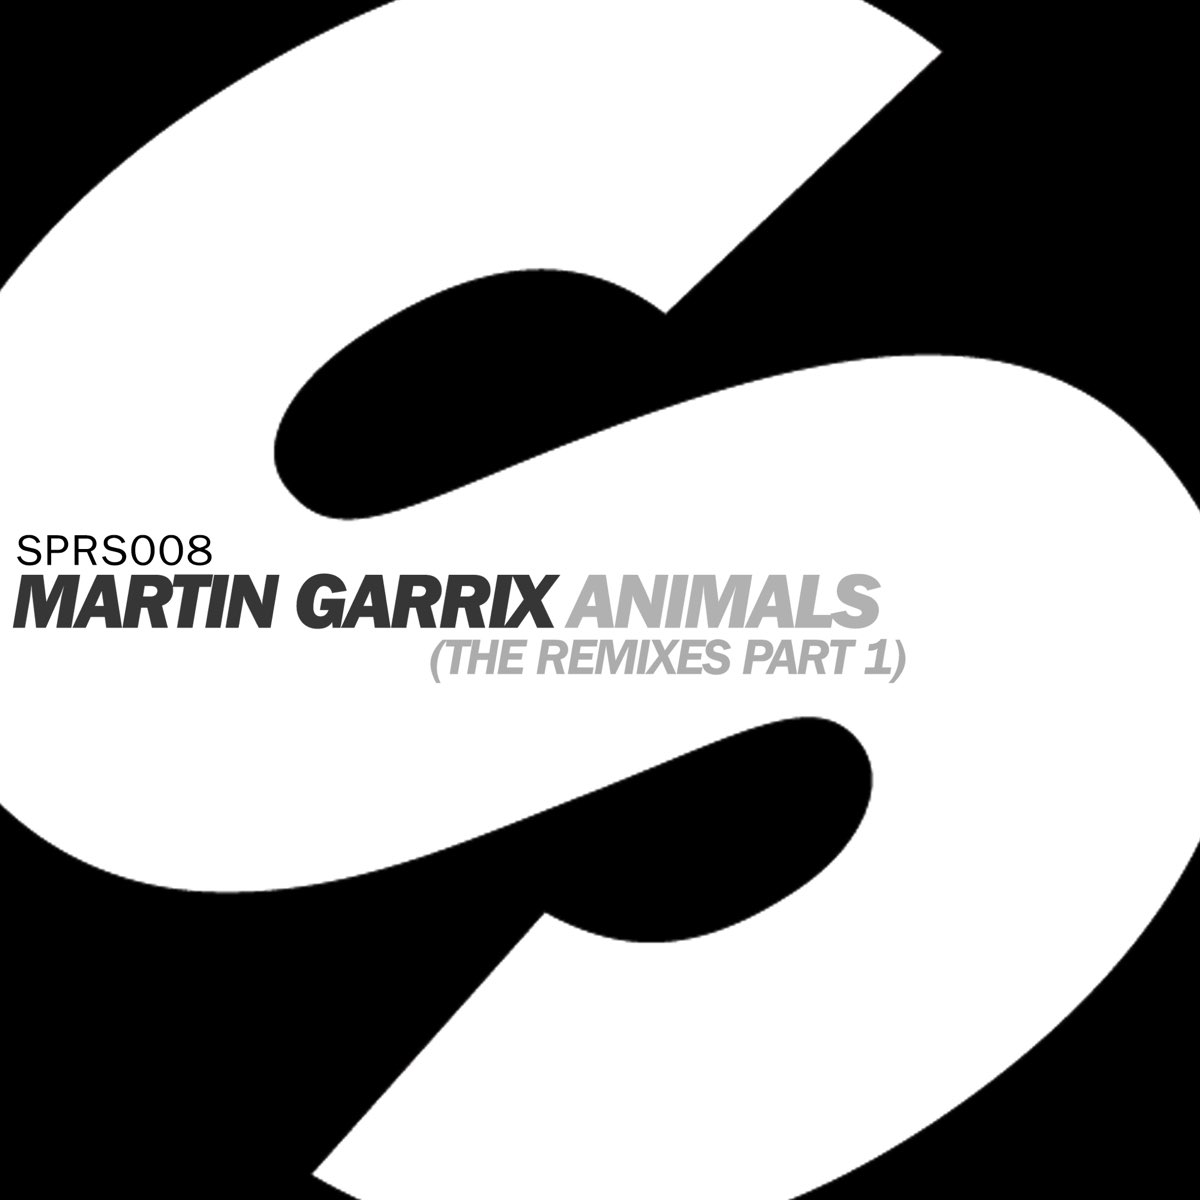 Animals (The Remixes Pt. 1) - EP by Martin Garrix on Apple Music